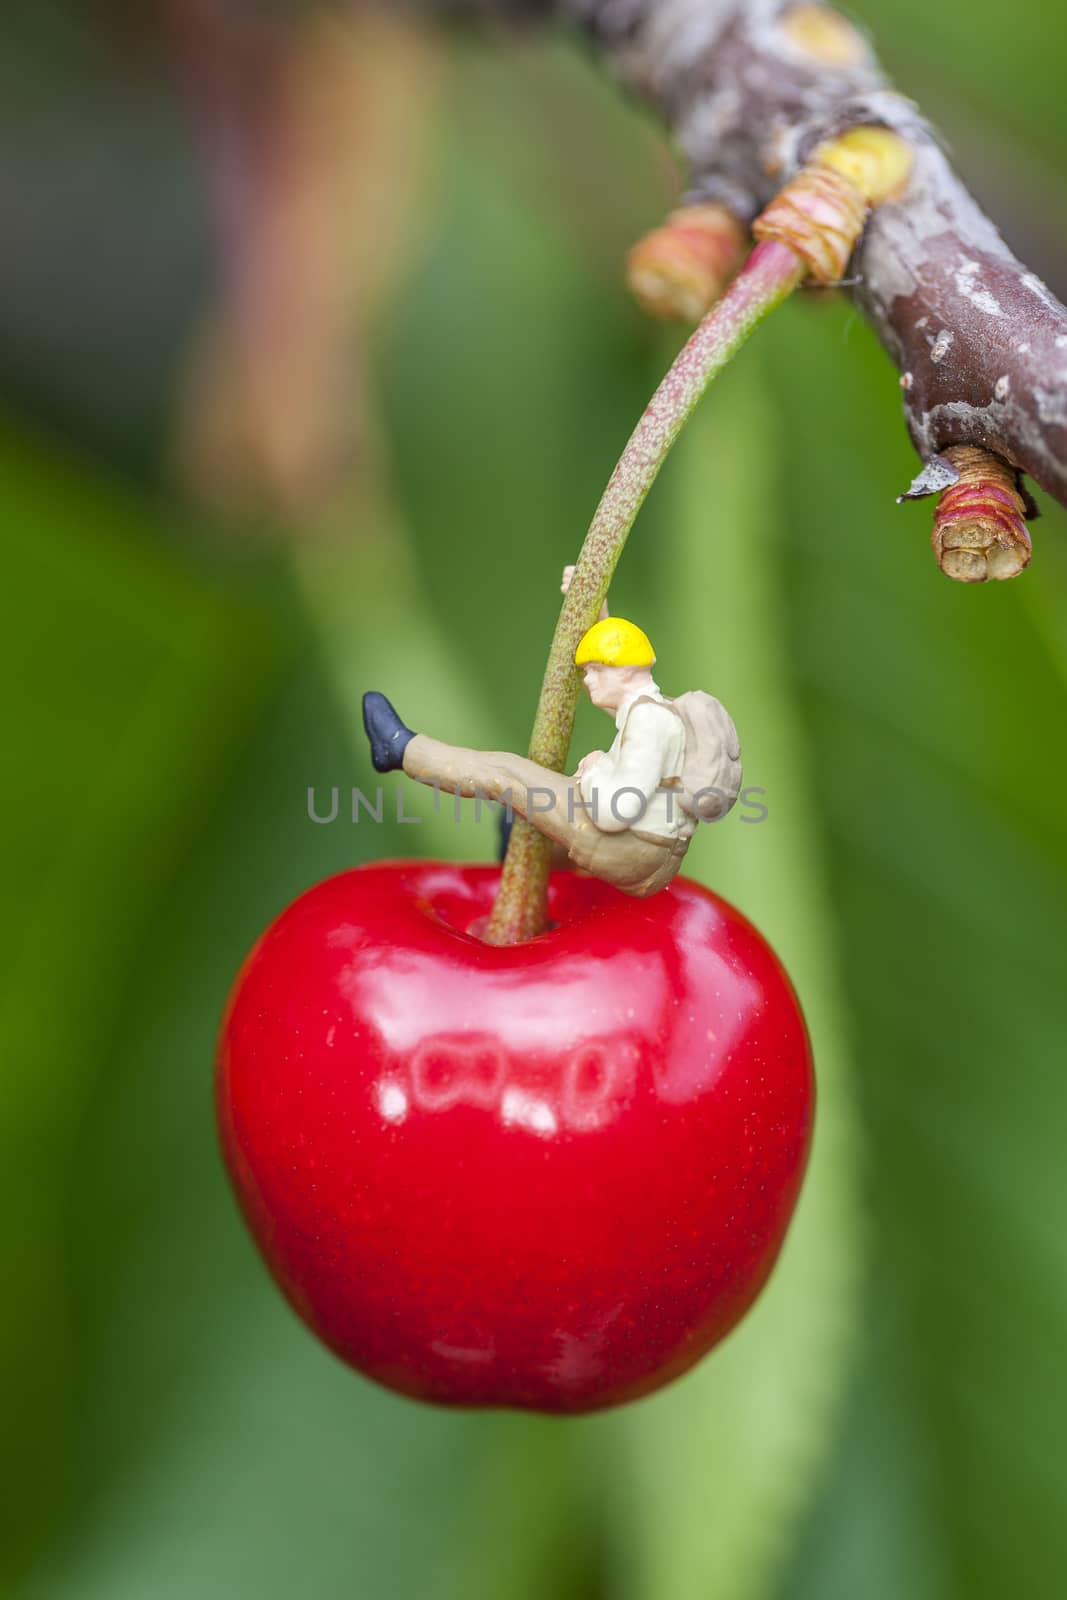 on a cherry by vwalakte